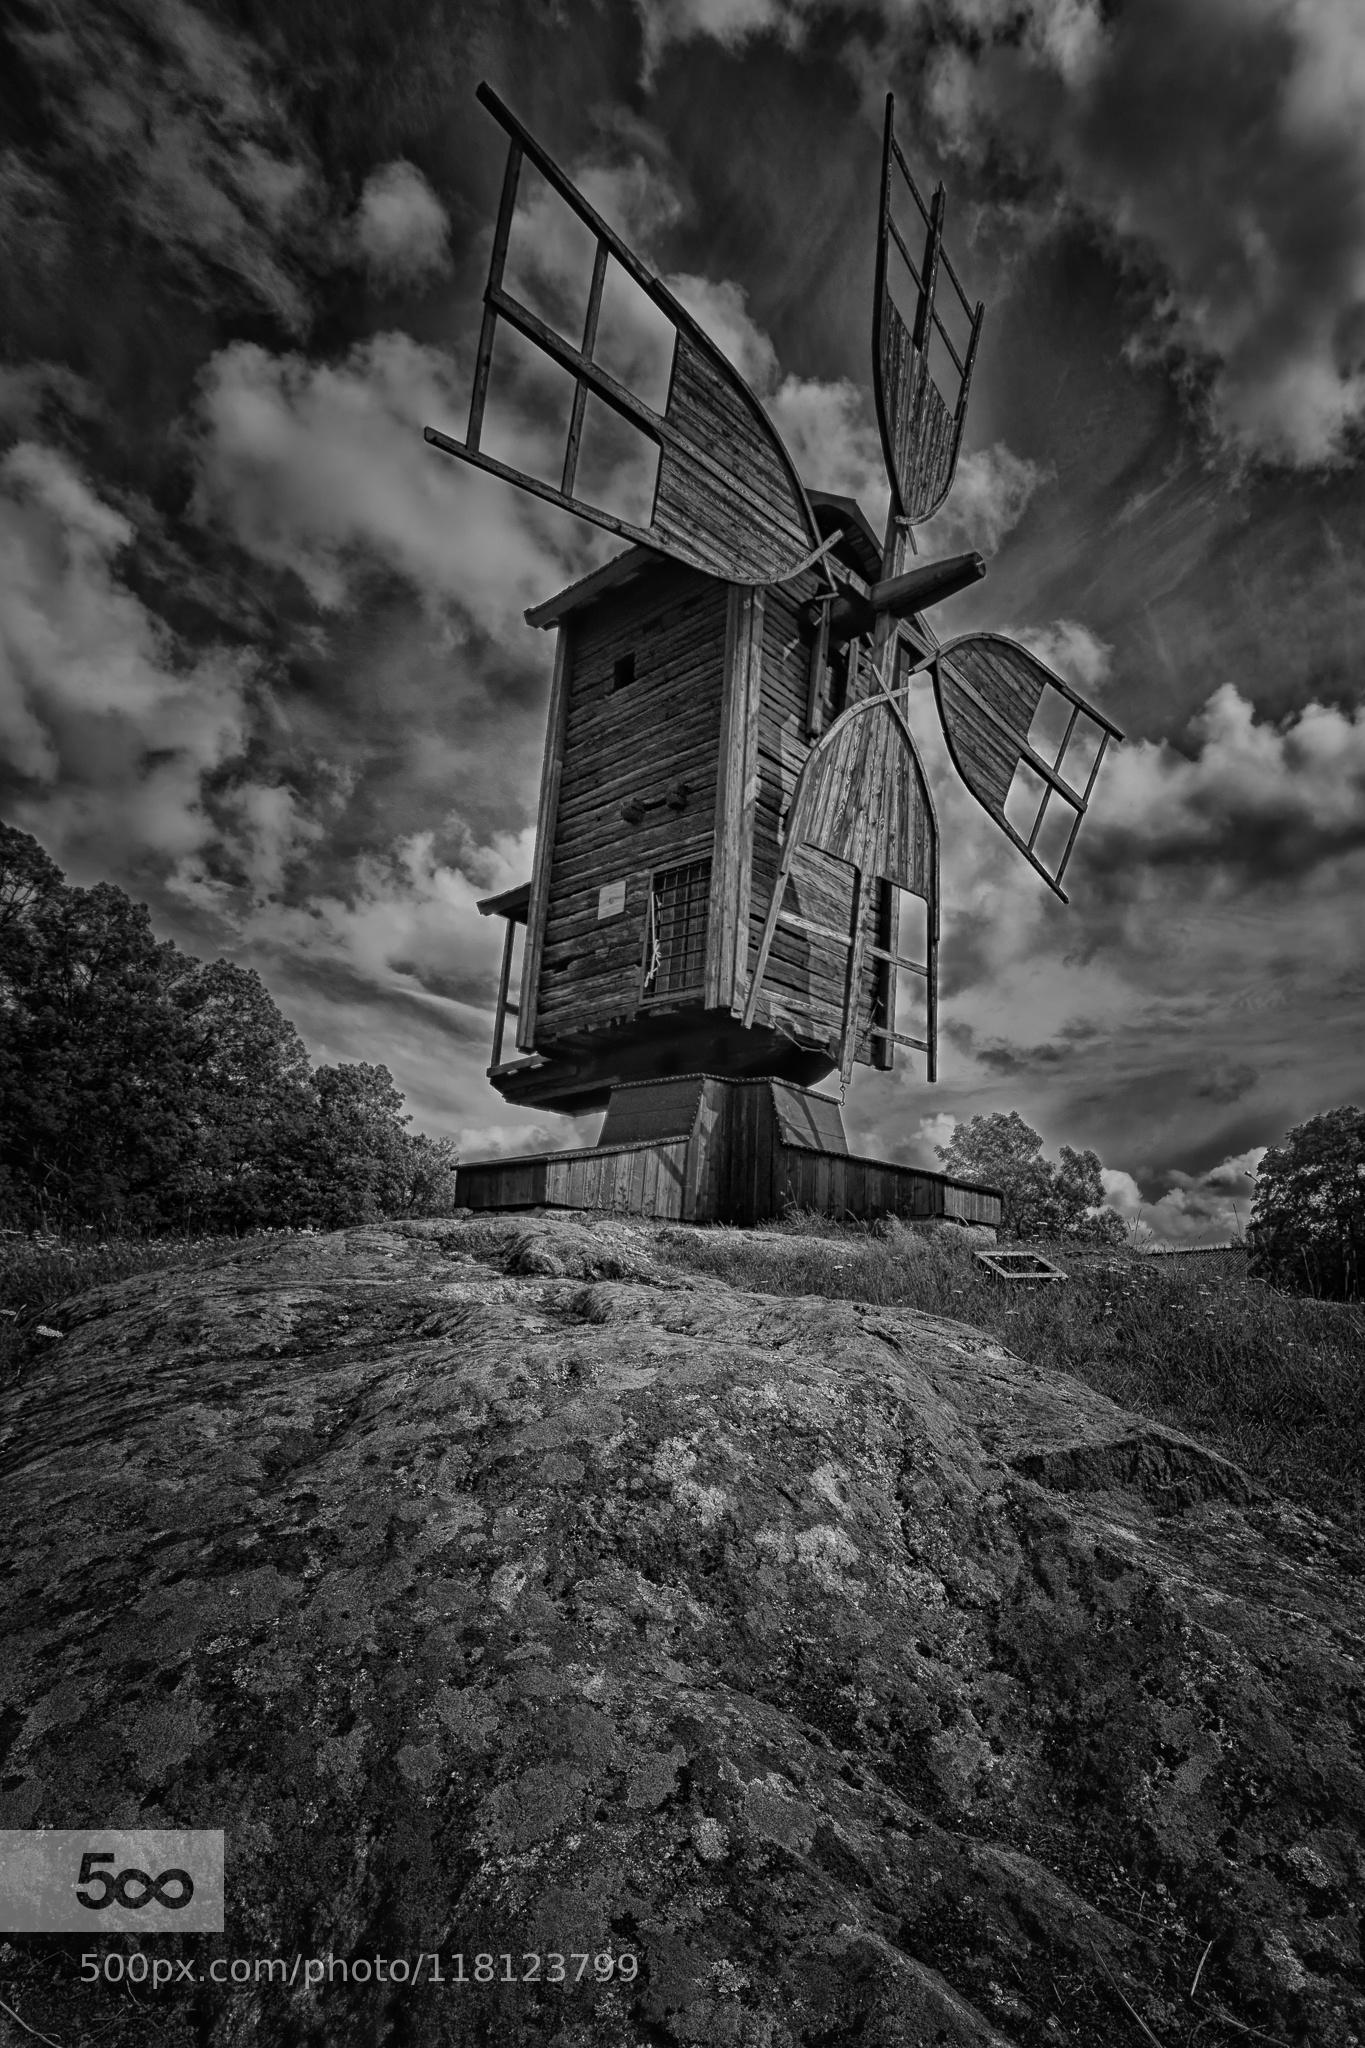 An Old Windmill